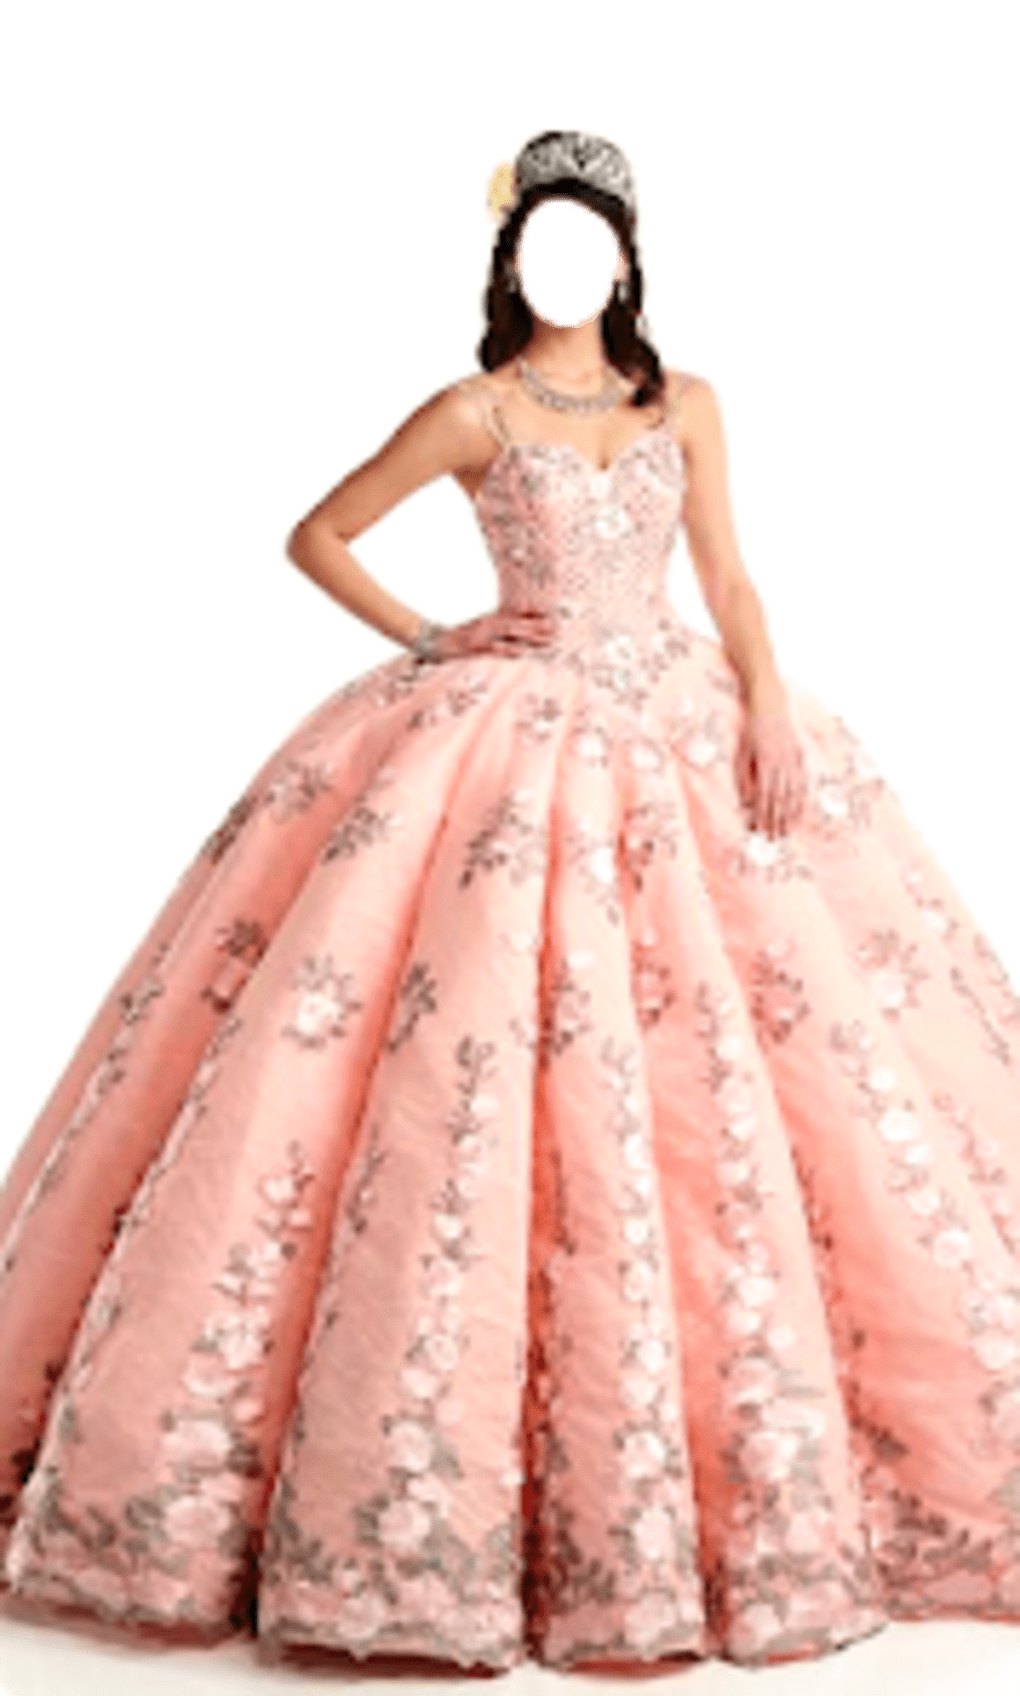 12 Disney-Inspired Dresses for the Quinceañera of Your Dreams | Quince  dresses, Gowns, Disney inspired dresses